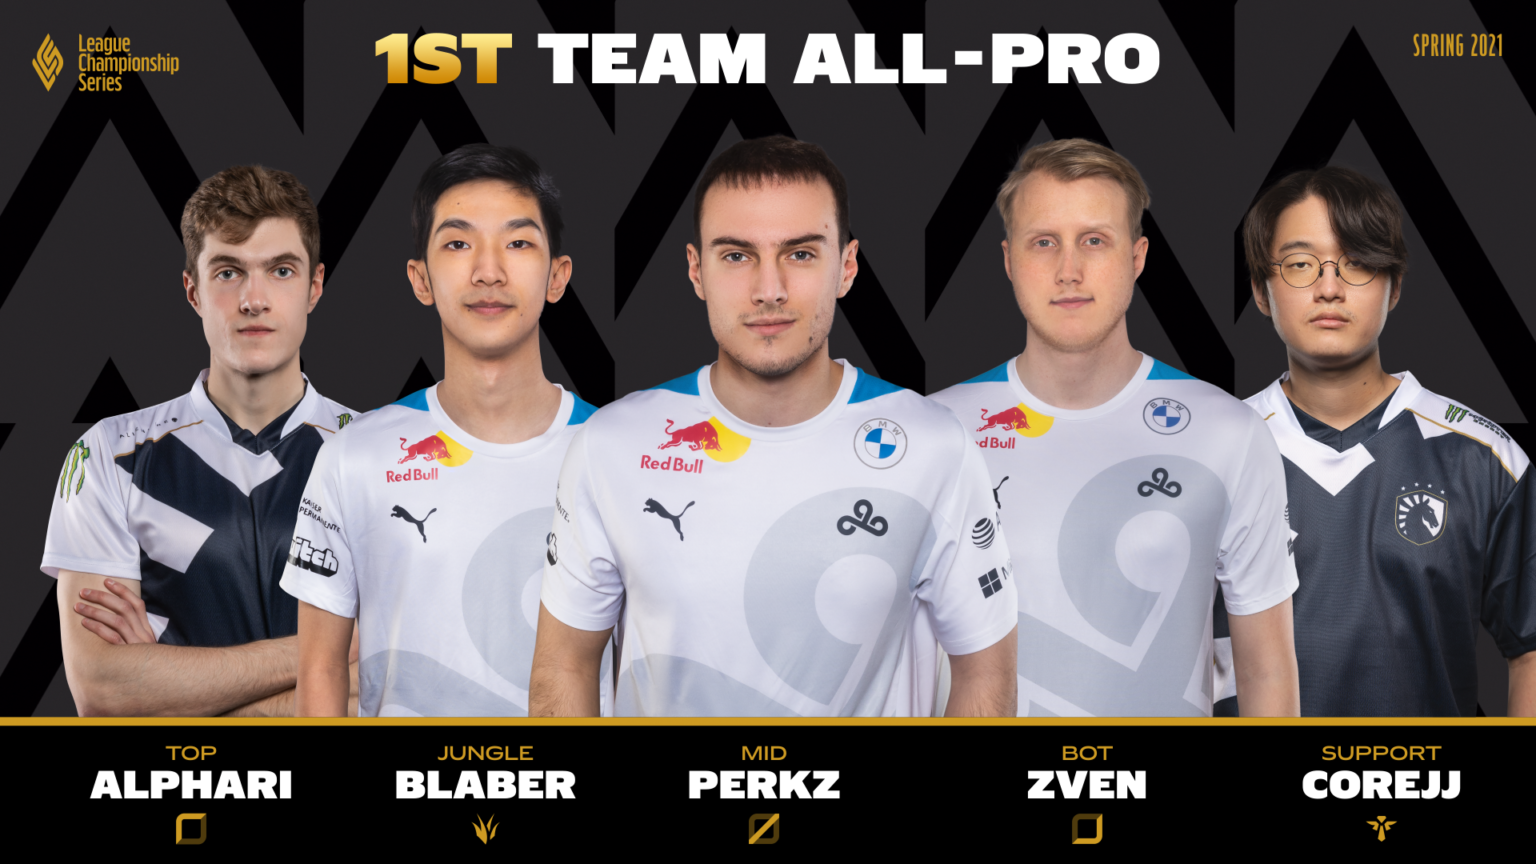 Alphari and Perkz won 1st Team all-Pro in their first LCS split as imports.